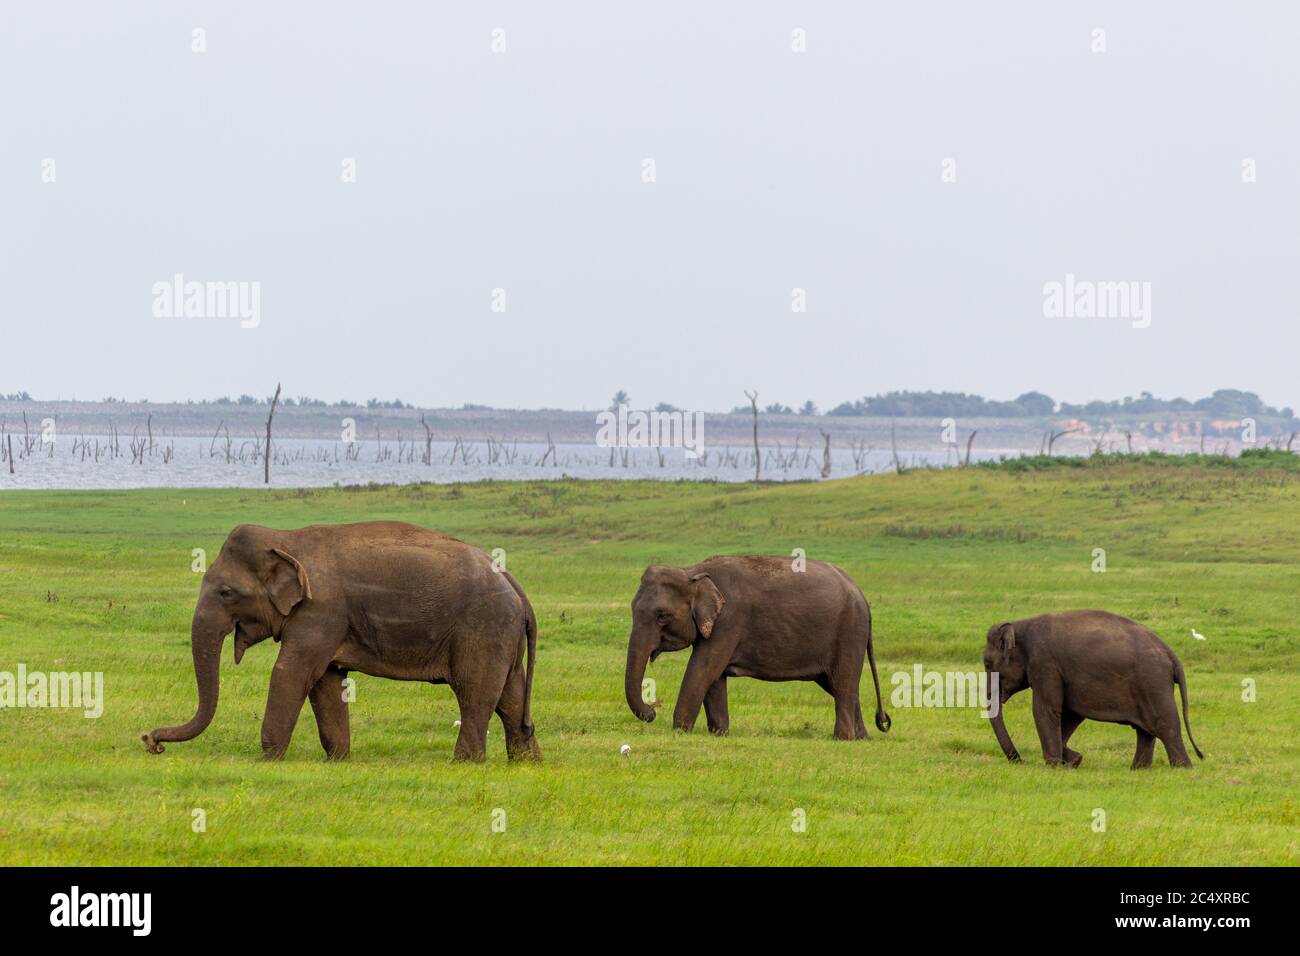 Two Baby elephants with mother and savanna birds on a green field relaxing. Concept of animal care, travel and wildlife observation. Stock Photo